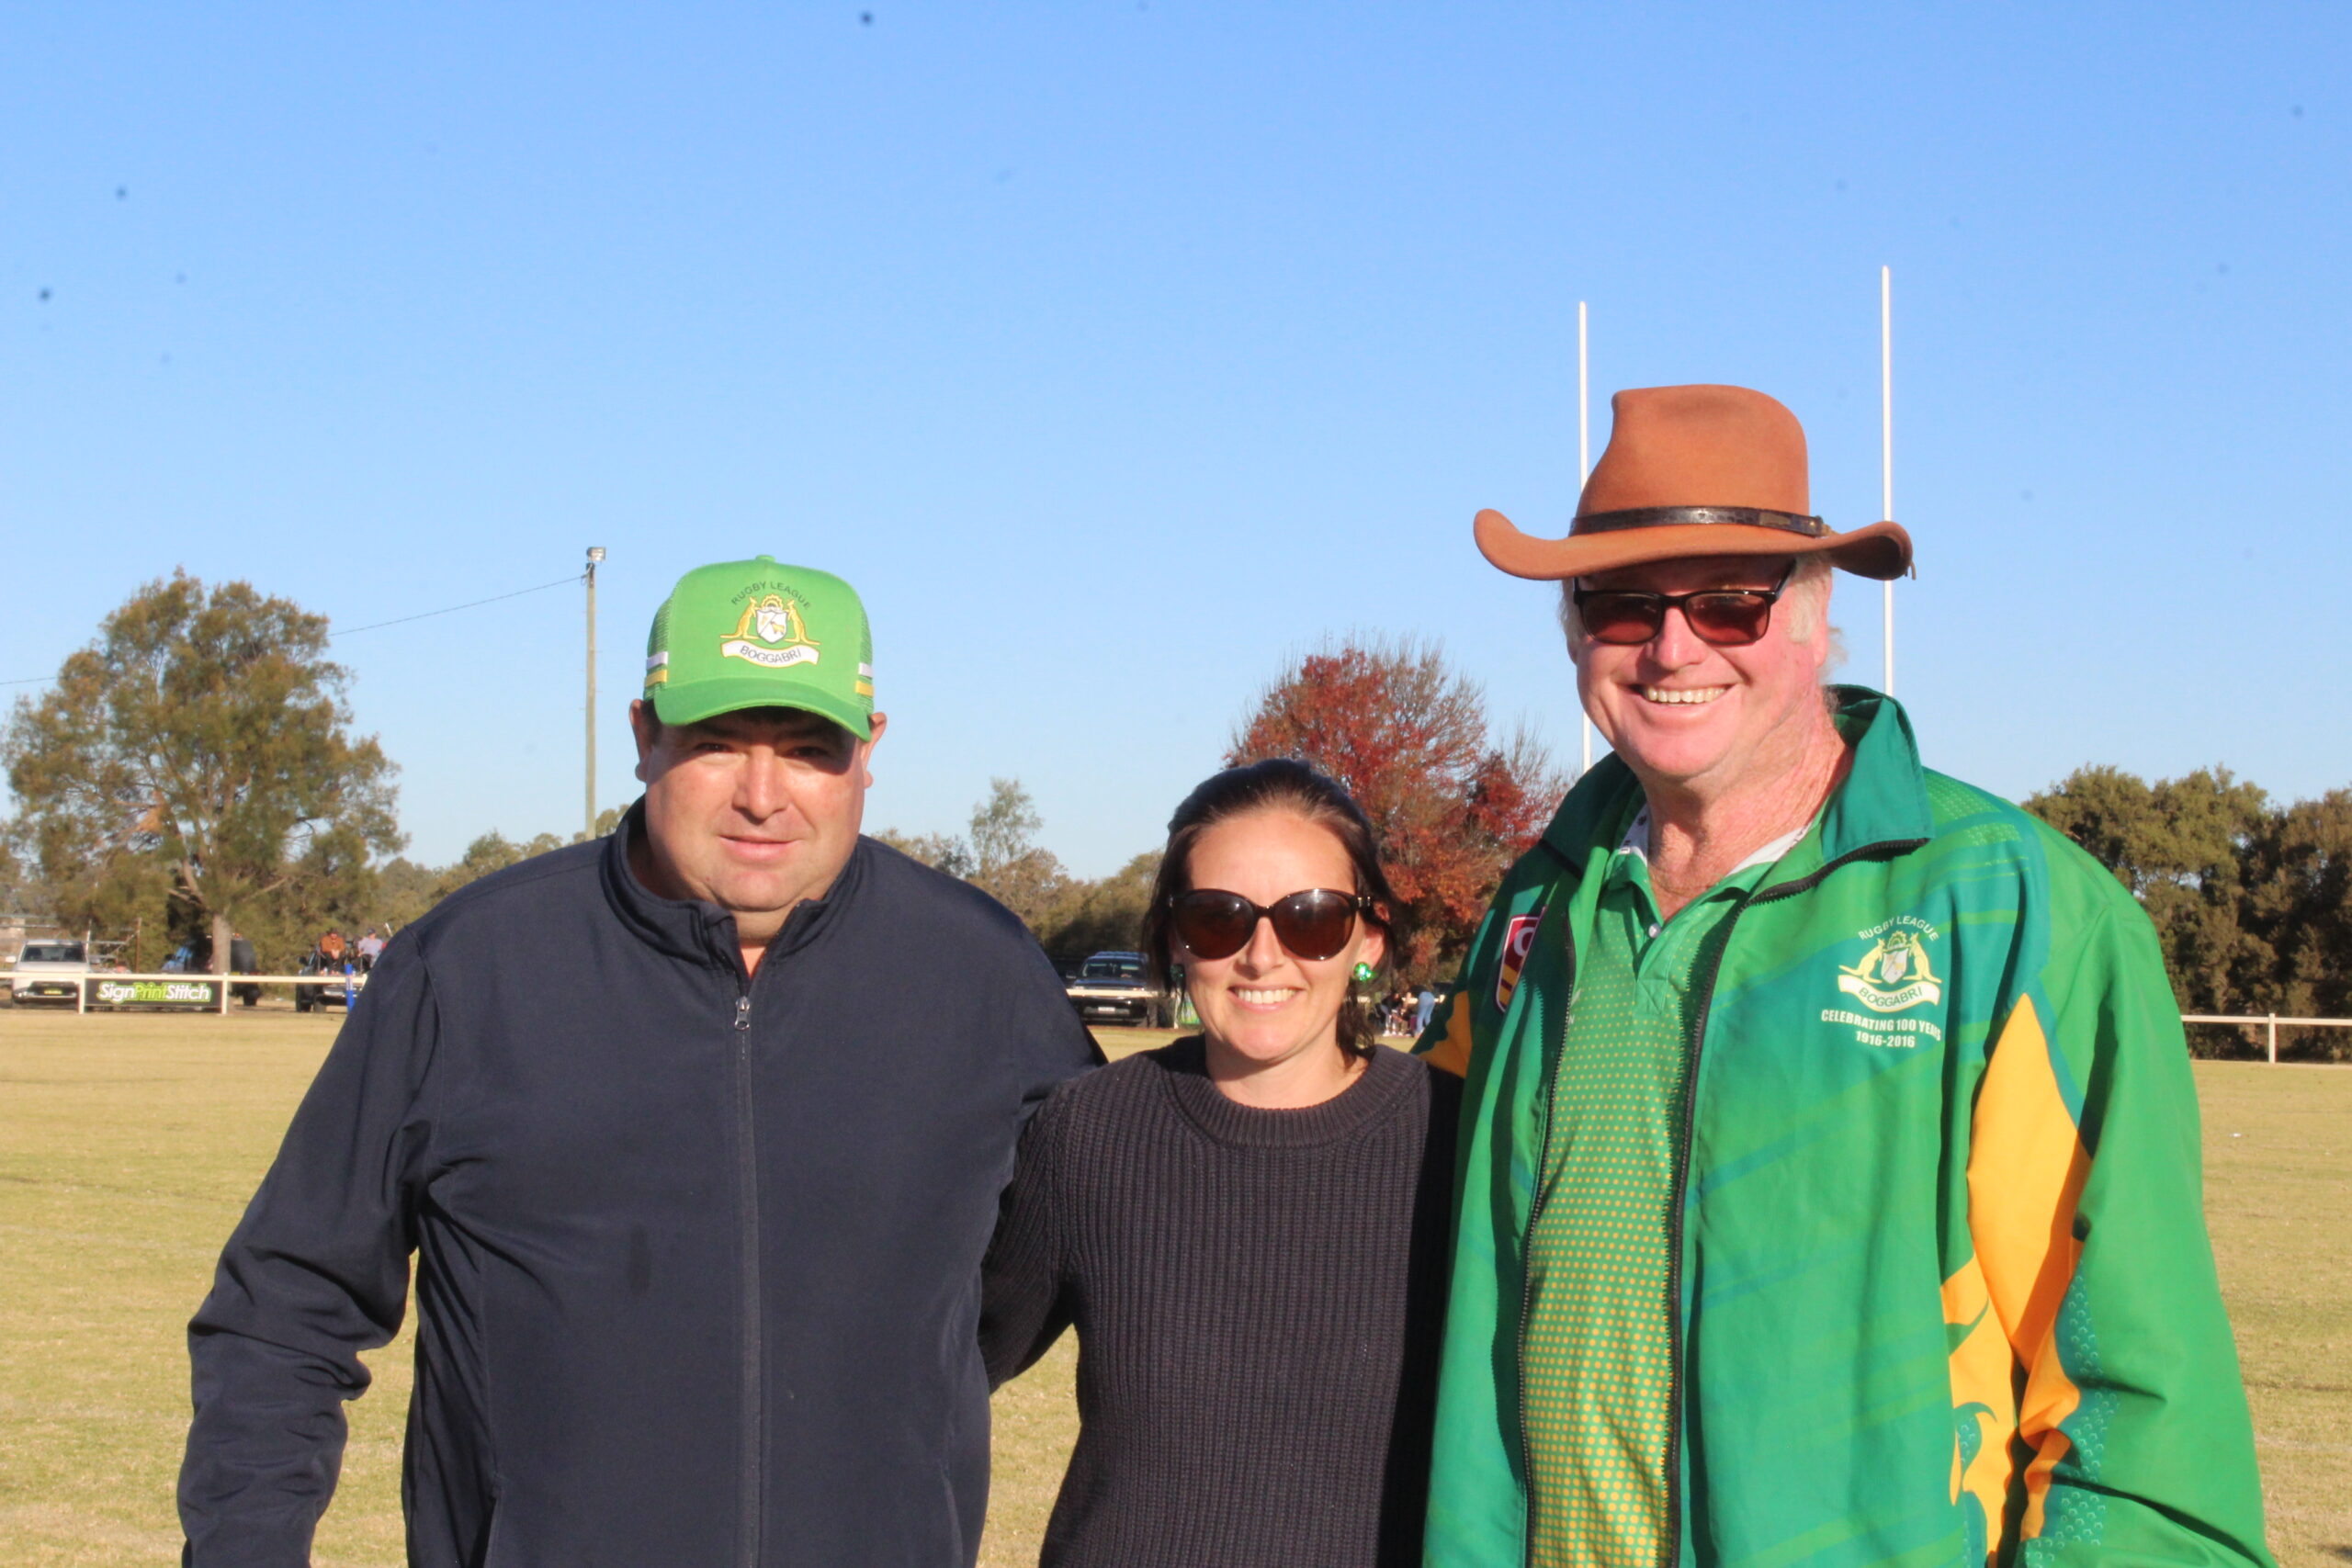 Family fun day at Jubilee Oval a huge success